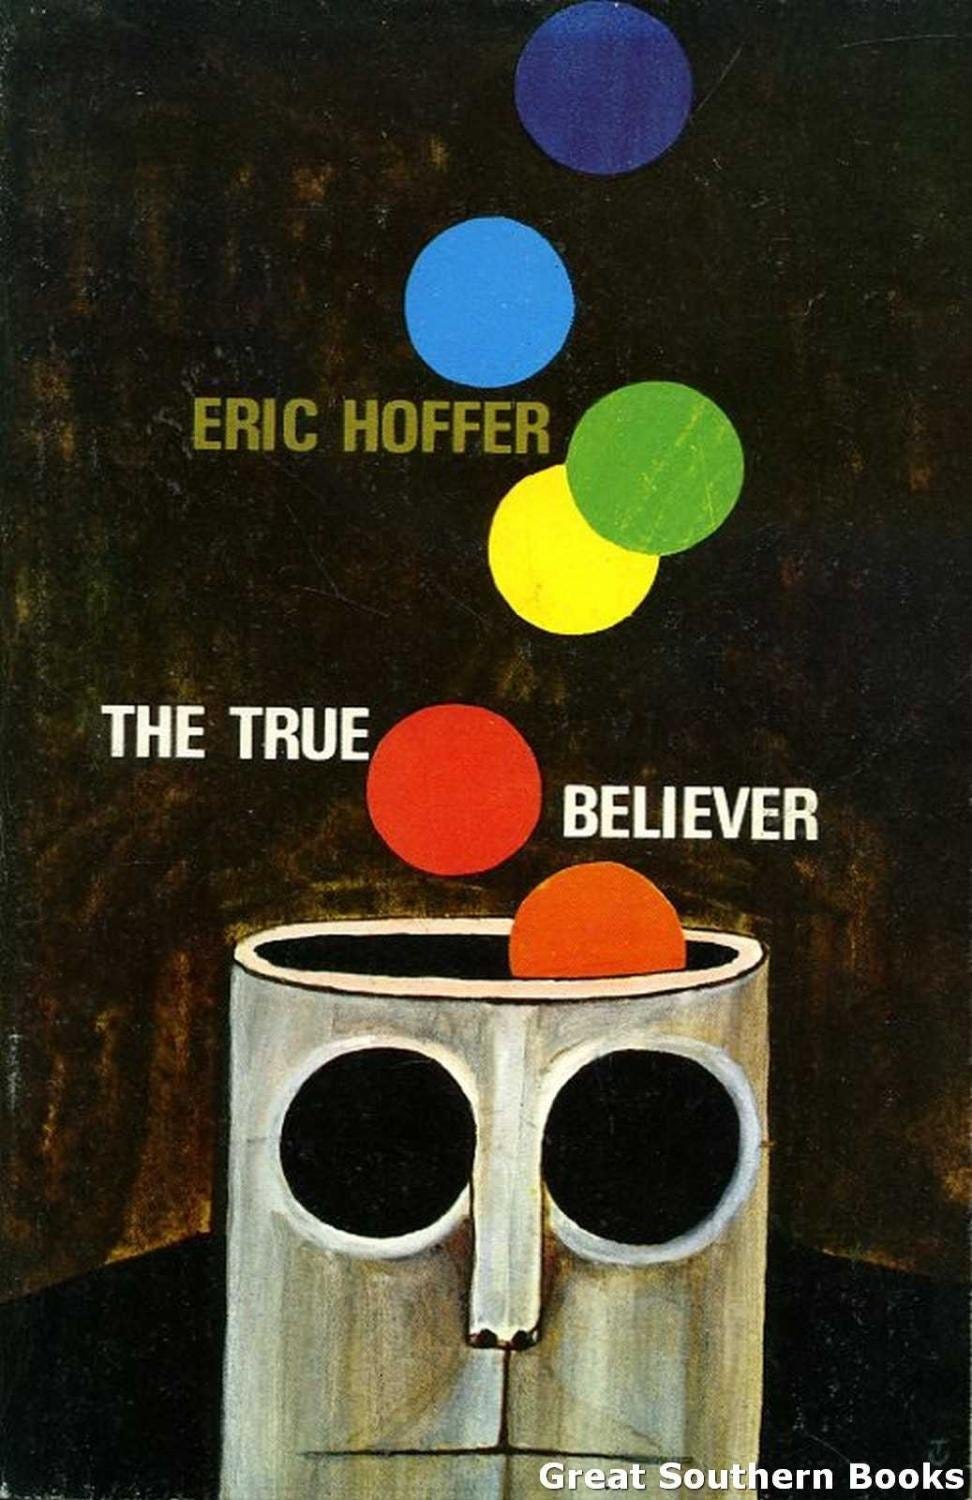 Eliza Mondegreen on Twitter: "Some quotes and thoughts on Eric Hoffer's The  True Believer, which I've been reading this week...  https://t.co/4KNTKbyv0y" / Twitter